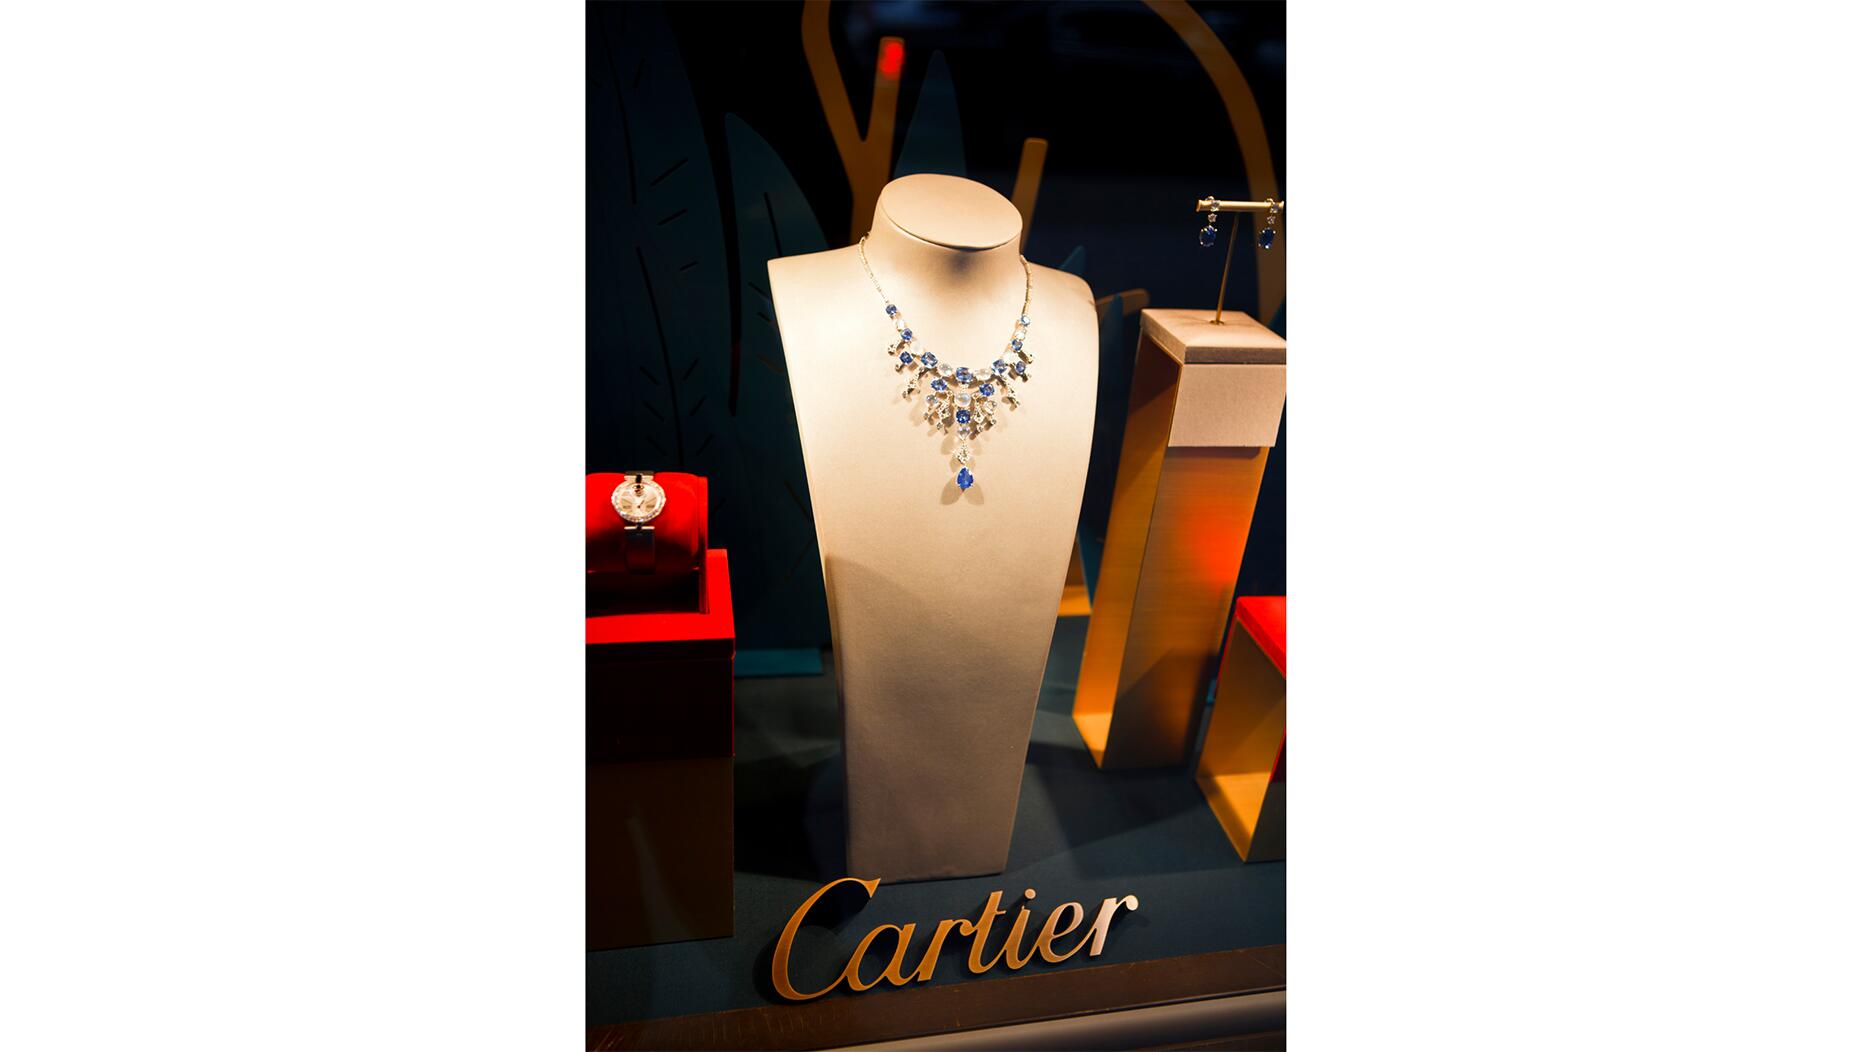 Richemont sees all-time high annual sales performance - Jeweller Magazine:  Jewellery News and Trends